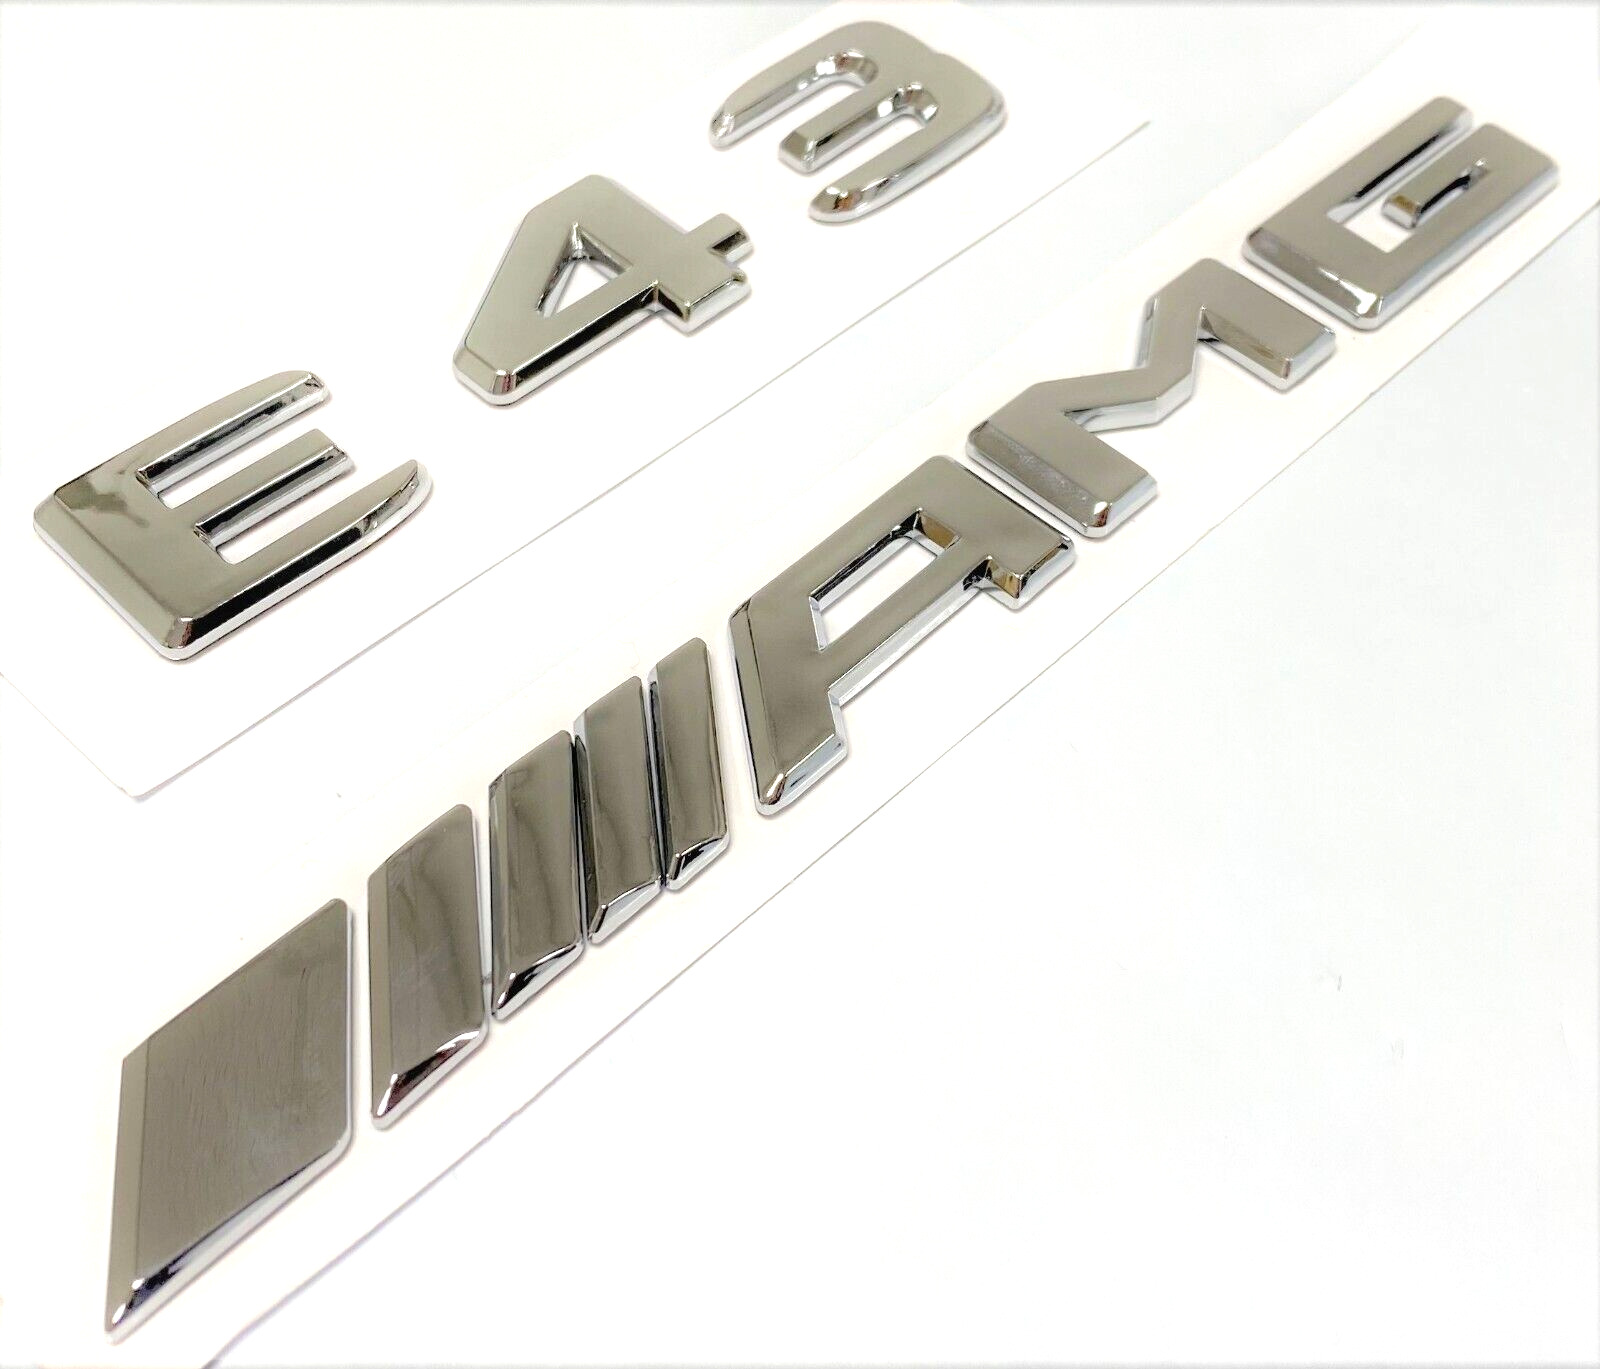 #2 E43 + AMG CHROME FIT MERCEDES REAR TRUNK EMBLEM BADGE NAMEPLATE DECAL NUMBERS